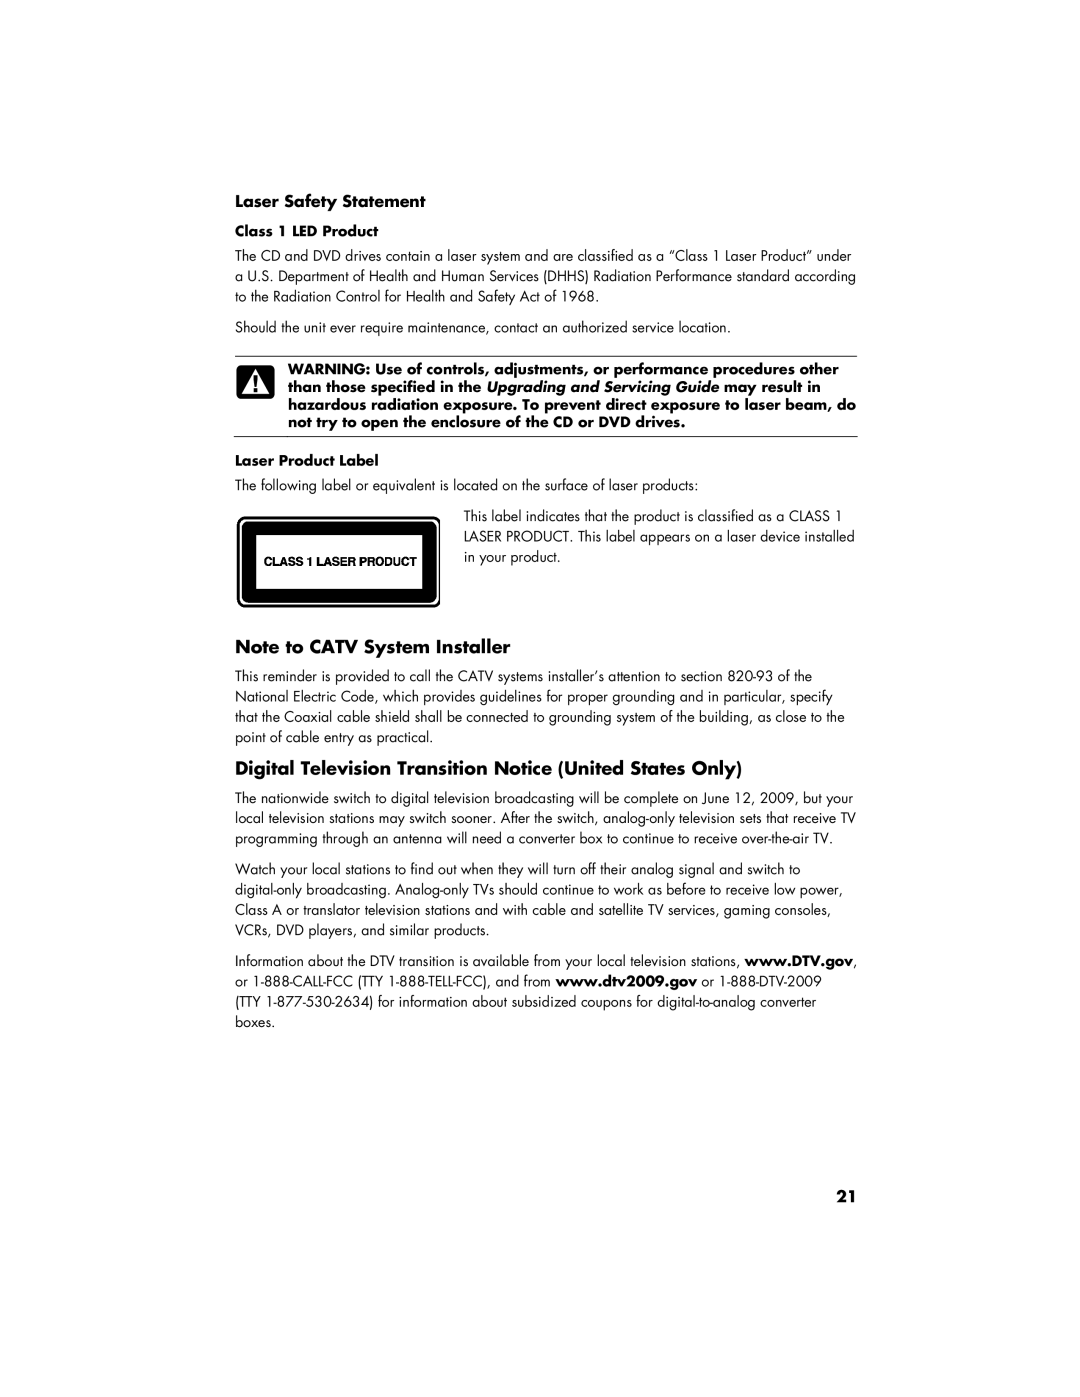 HP S3905F, SR5908F Digital Television Transition Notice United States Only, Laser Safety Statement, Class 1 LED Product 